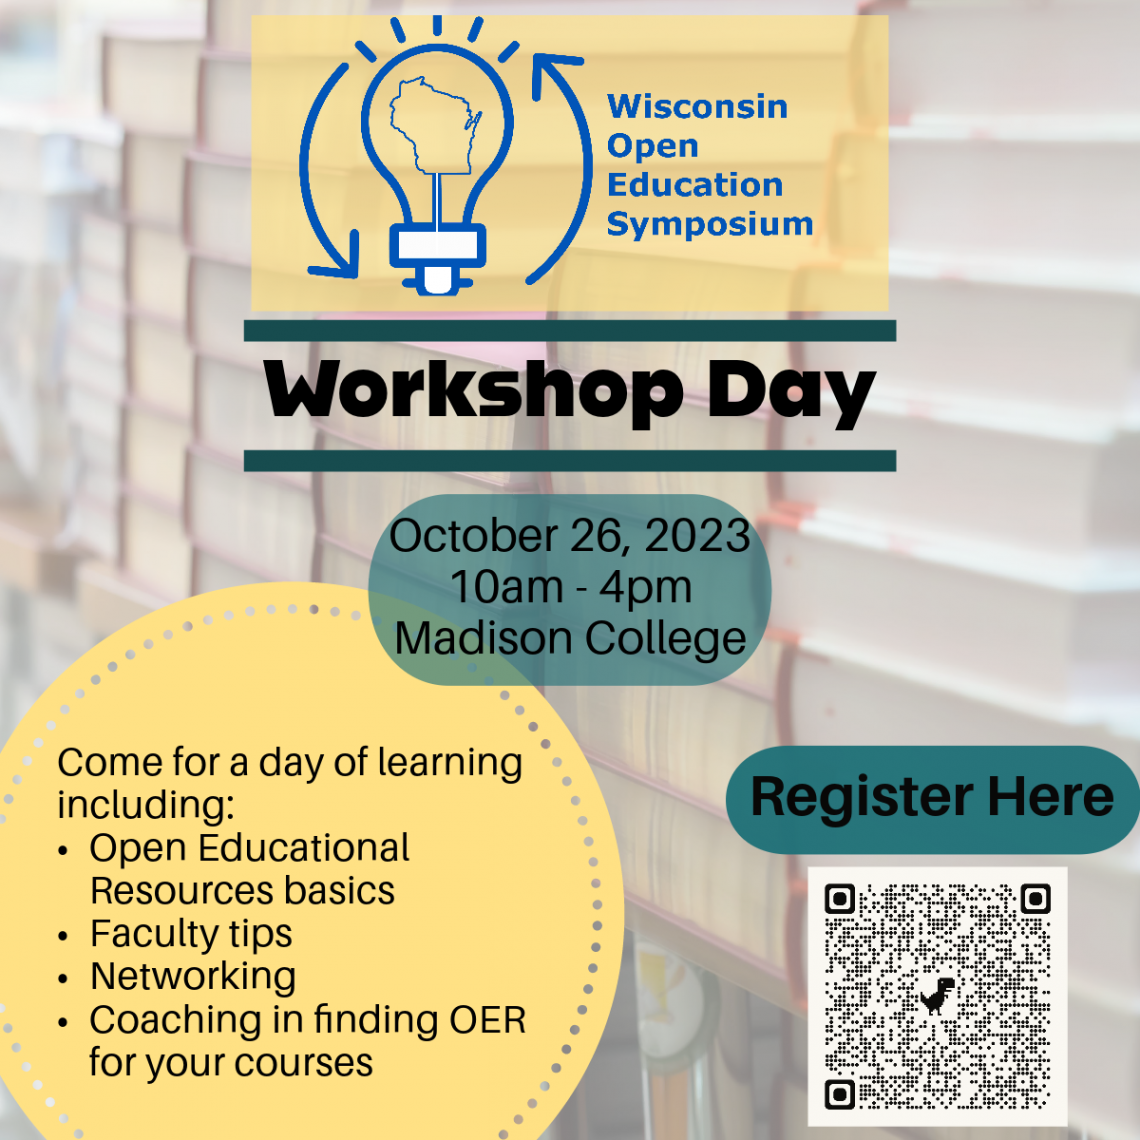 Come for a day of learning, including OER basics, faculty tips, networking and coaching to find OER for your courses.